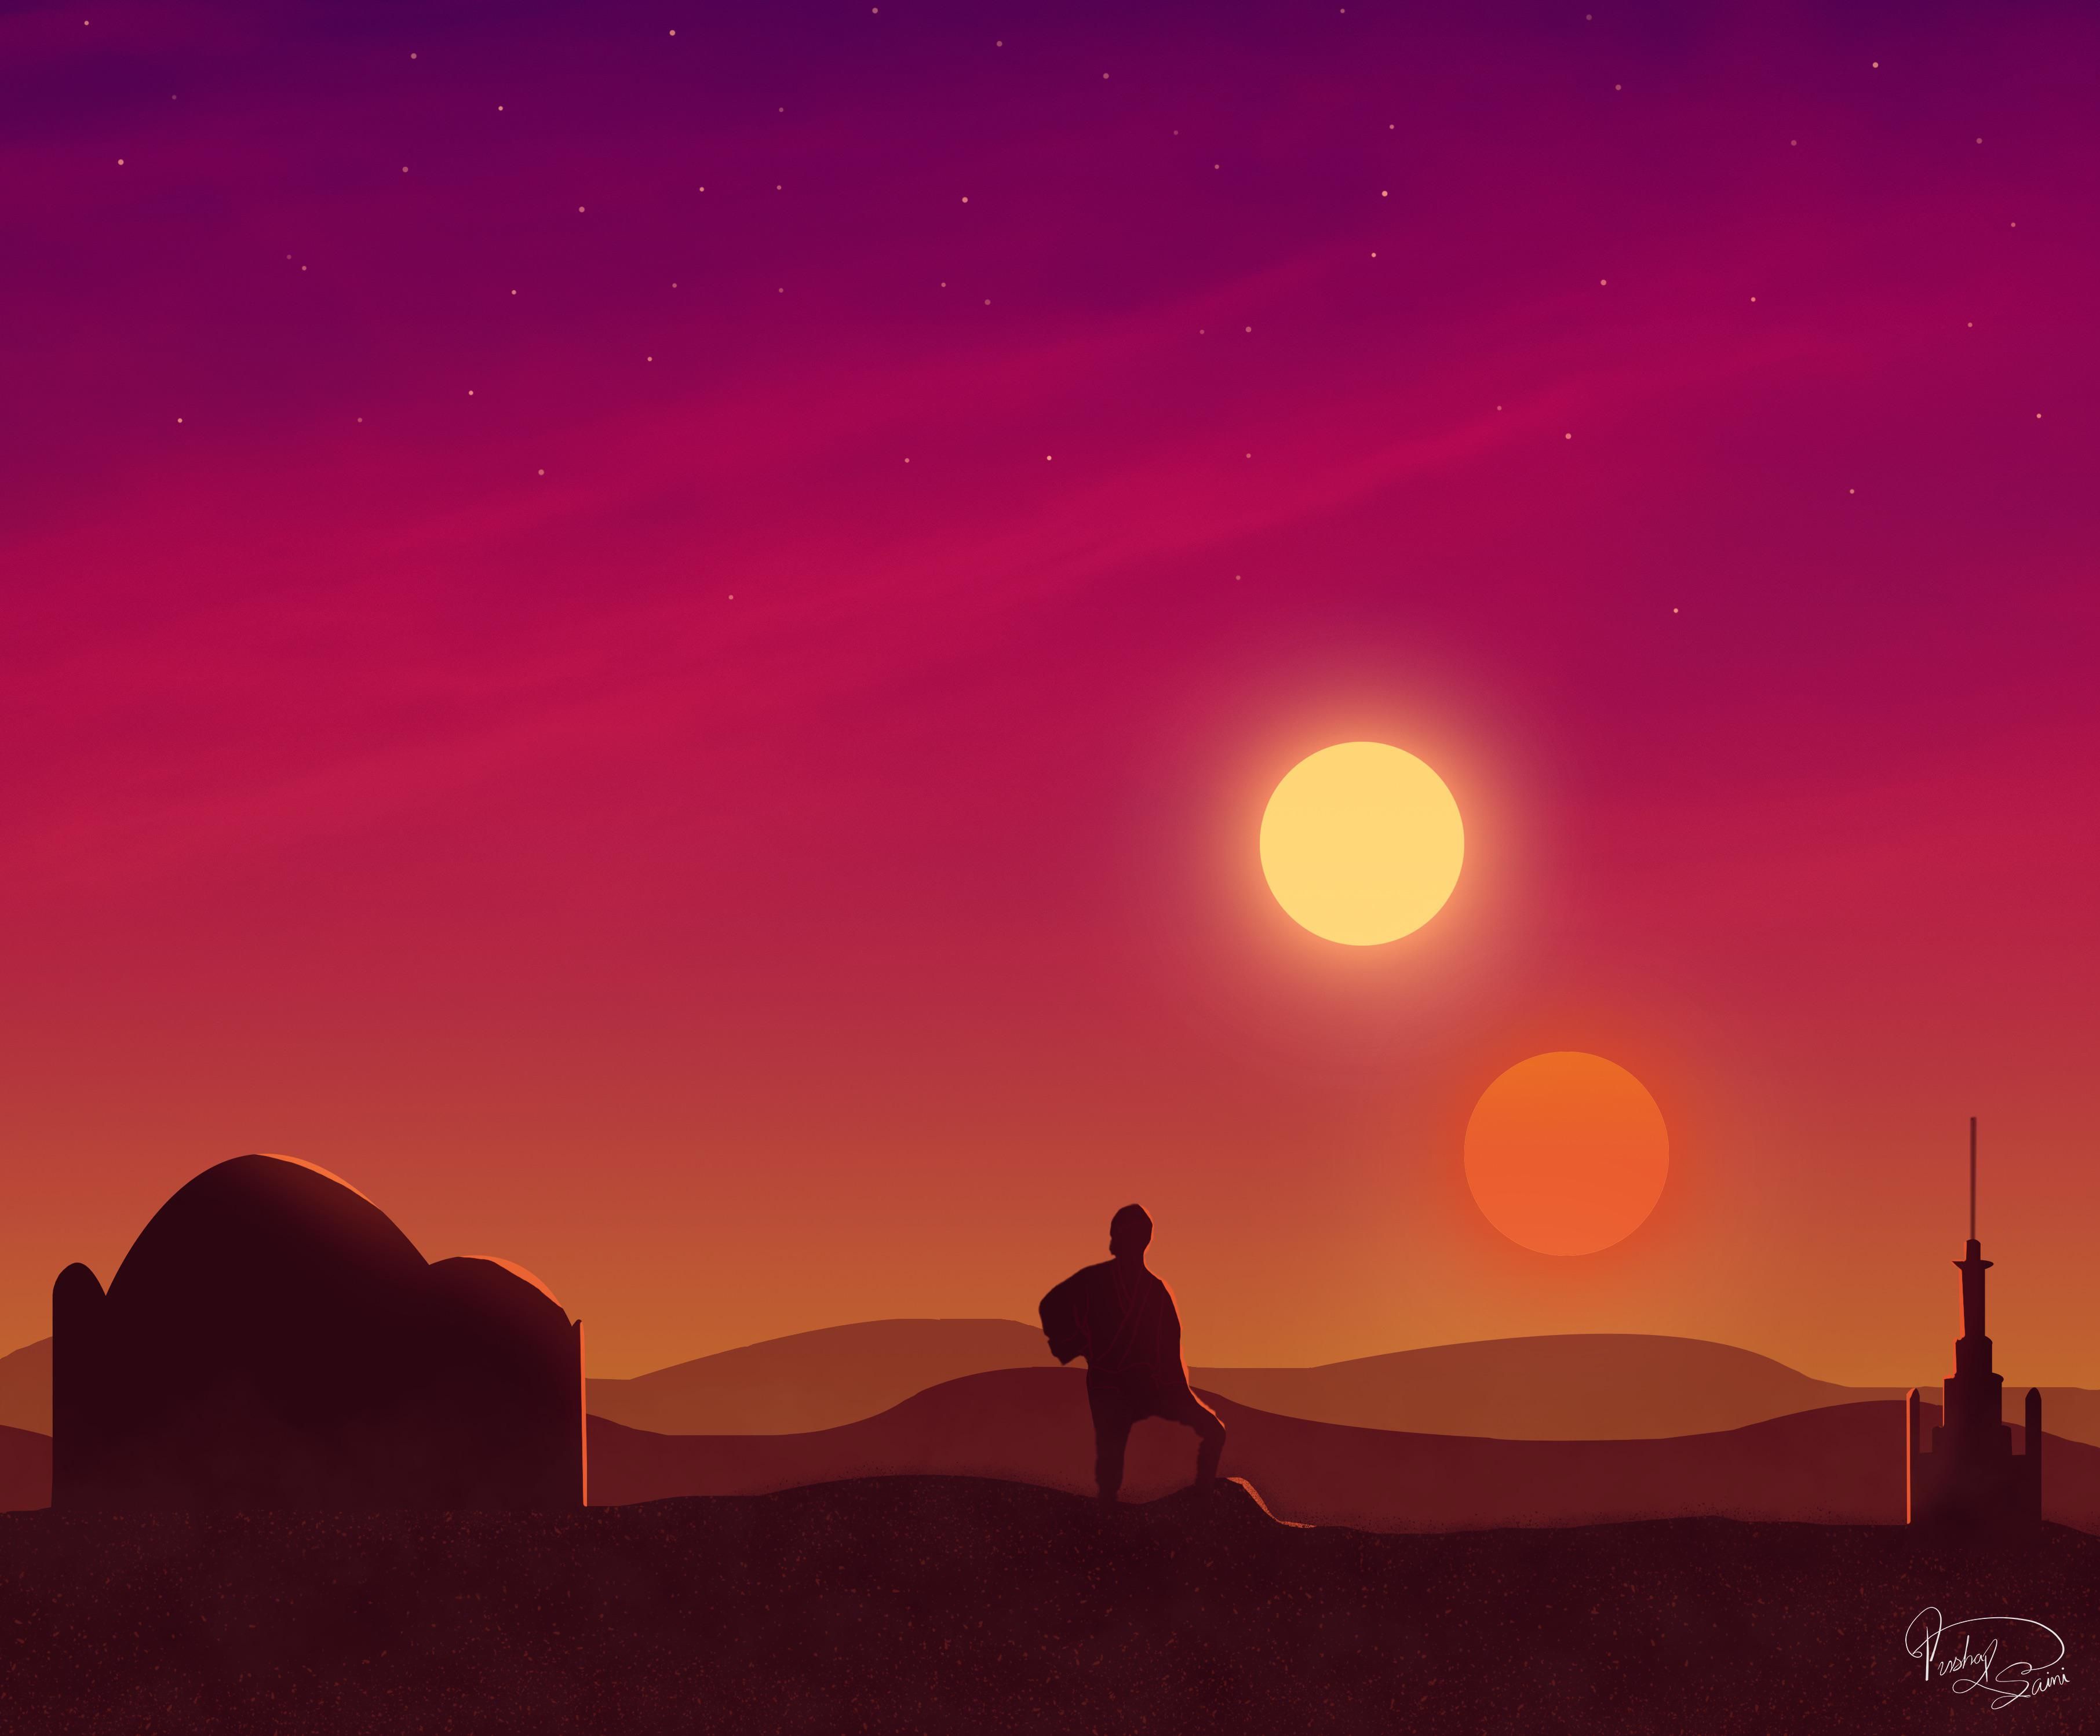 The Binary Sunset was the moment I feel in love with star wars. Star wars painting, Star wars wallpaper, Star wars image